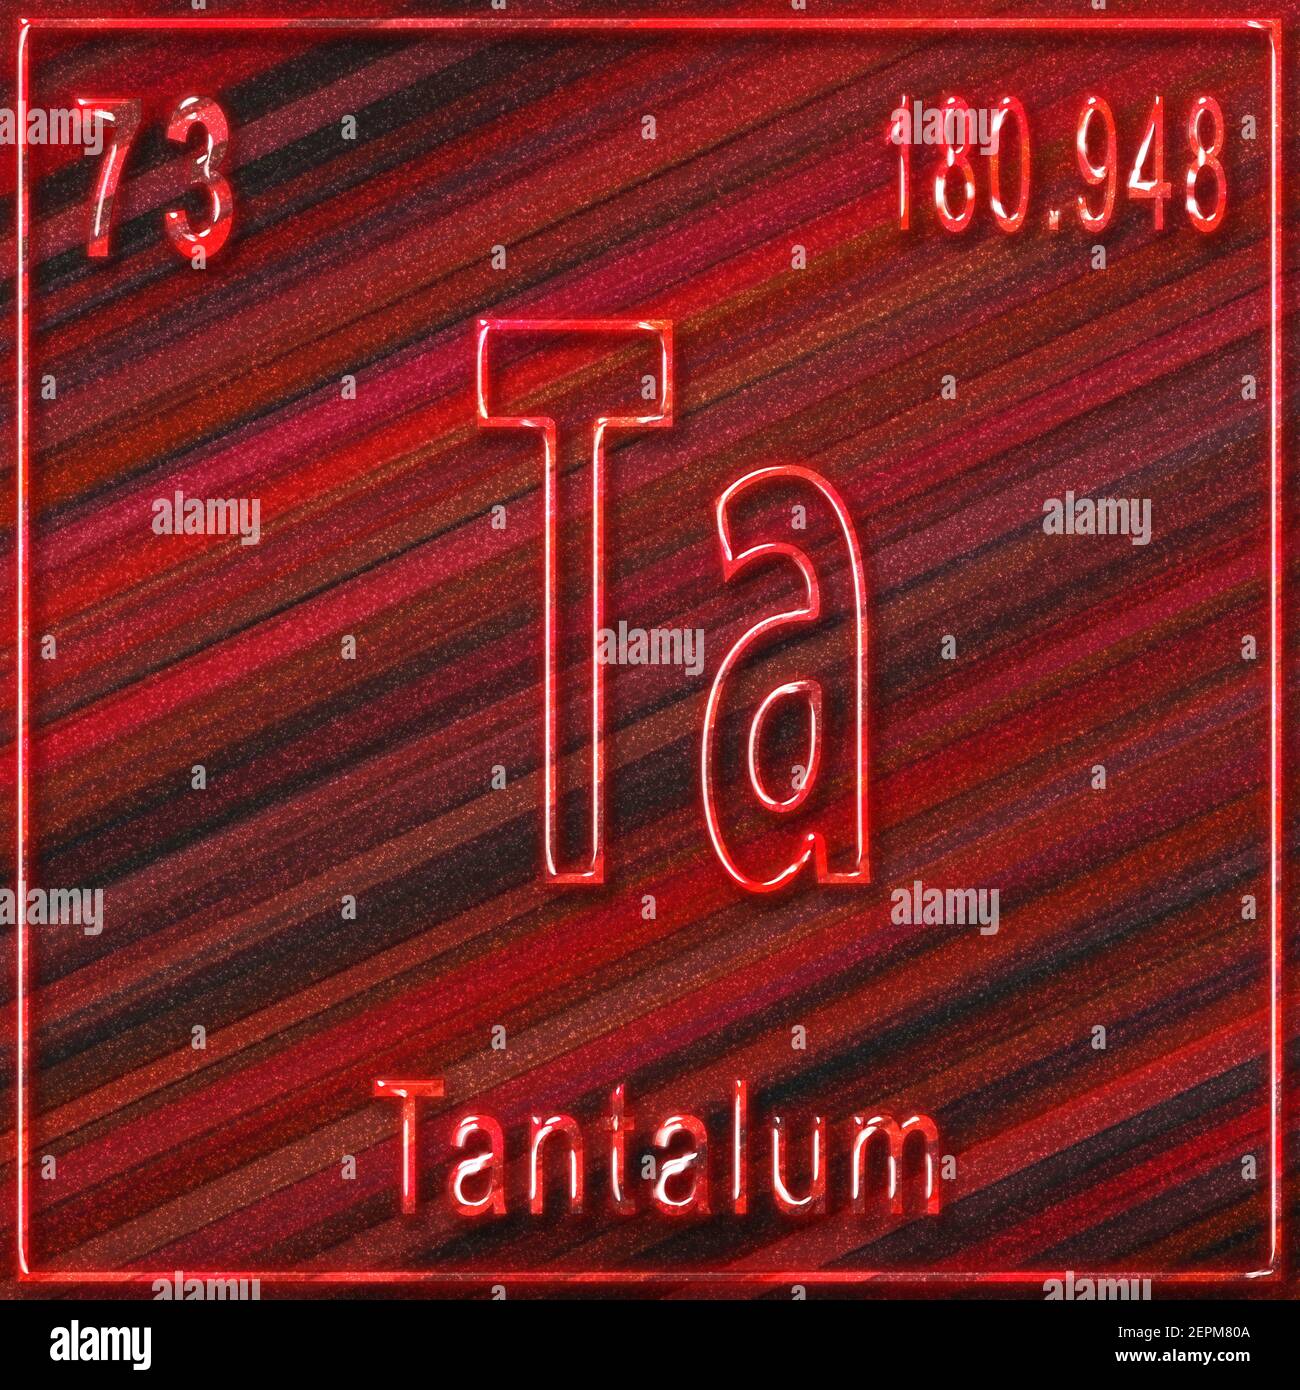 Tantalum chemical element, Sign with atomic number and atomic weight, Periodic Table Element Stock Photo